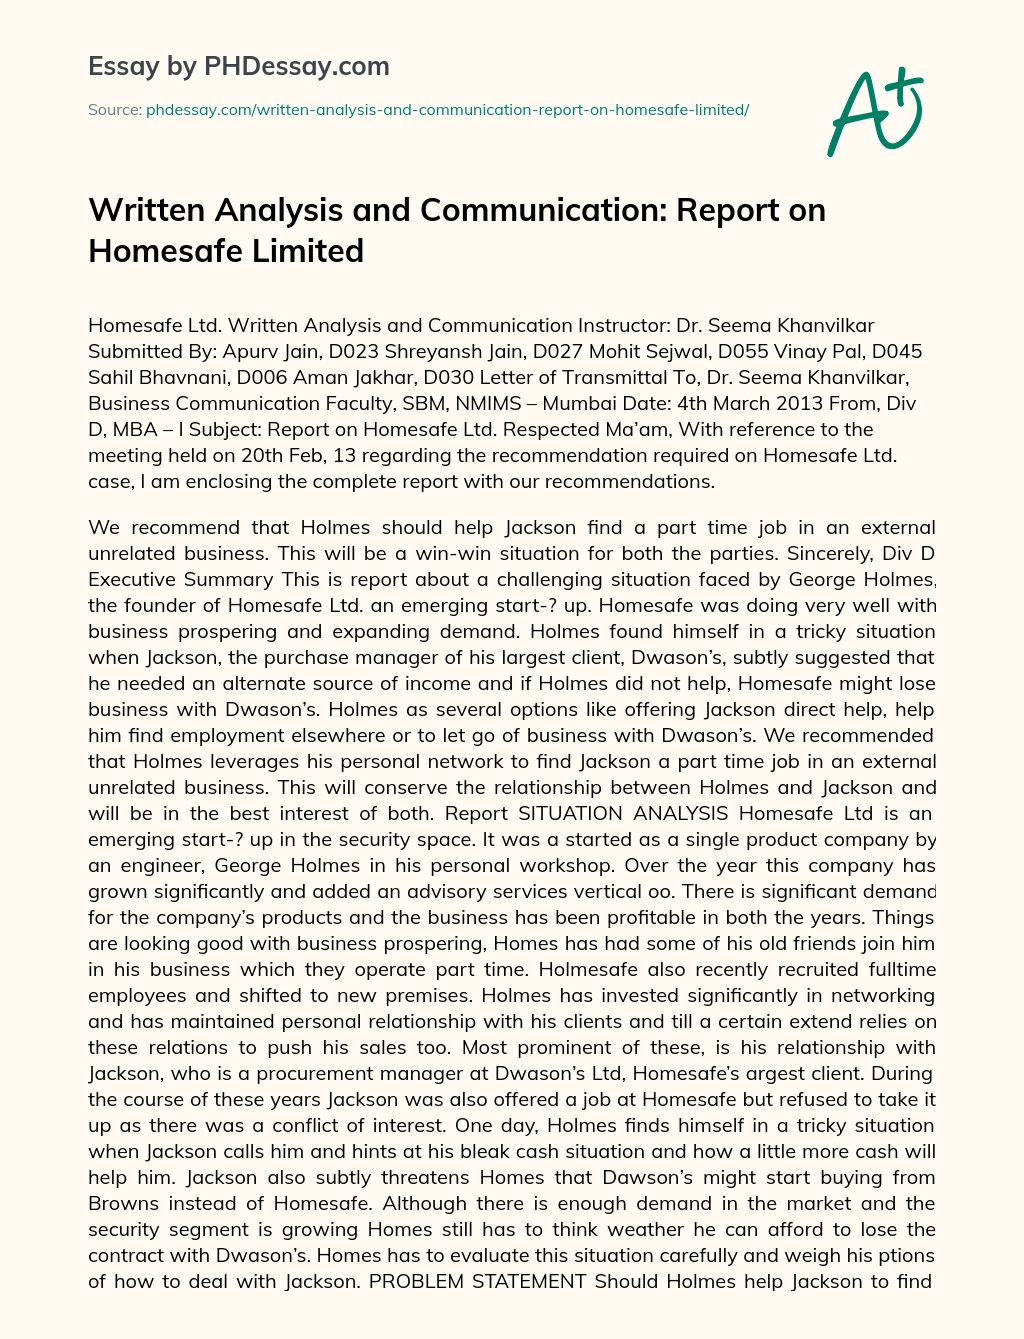 Written Analysis and Communication: Report on Homesafe Limited essay